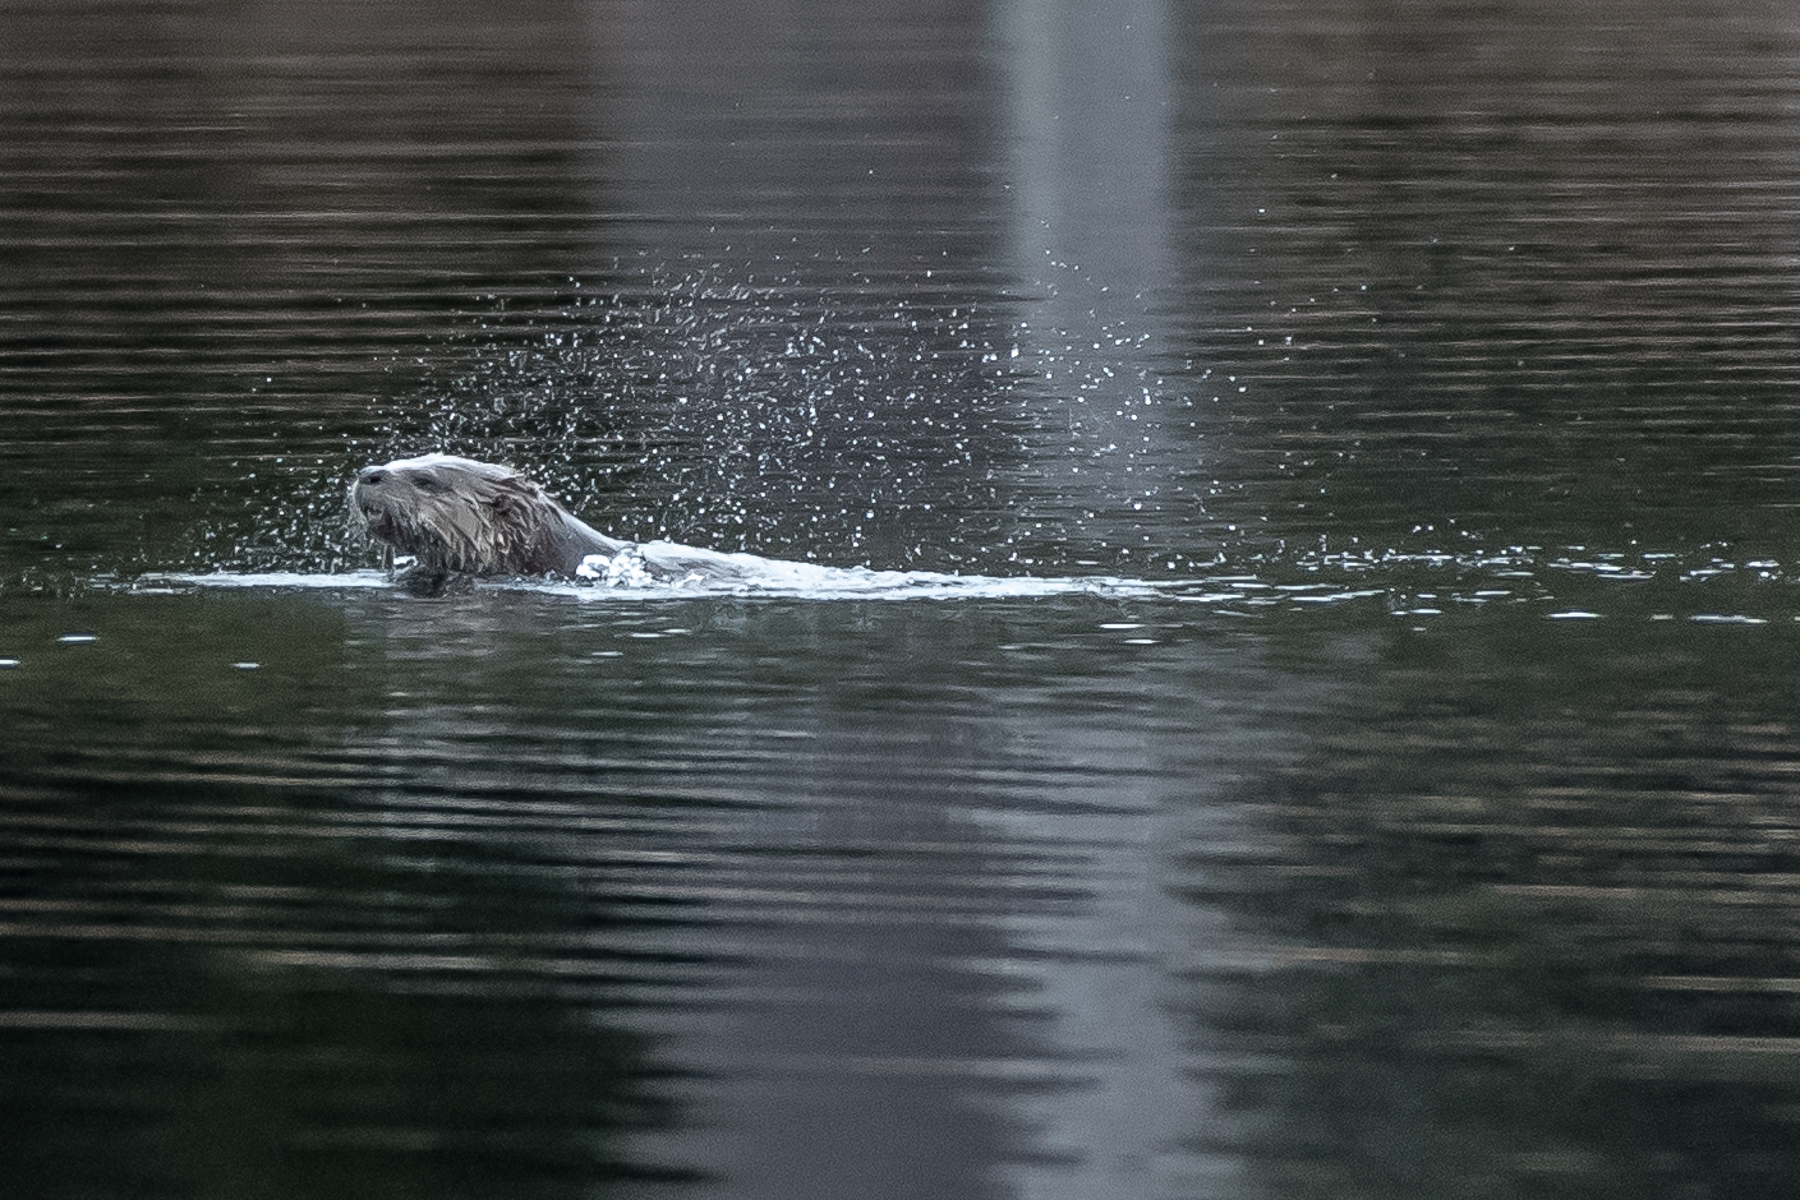   Ho Hum, &nbsp;another day, another otter     While sitting by a beaver pond this otter appeared fiercely fishing. &nbsp;Every time it surfaced it shook its head violently. &nbsp;I thought it would be fun to try to stop the action. &nbsp;3/26/16  